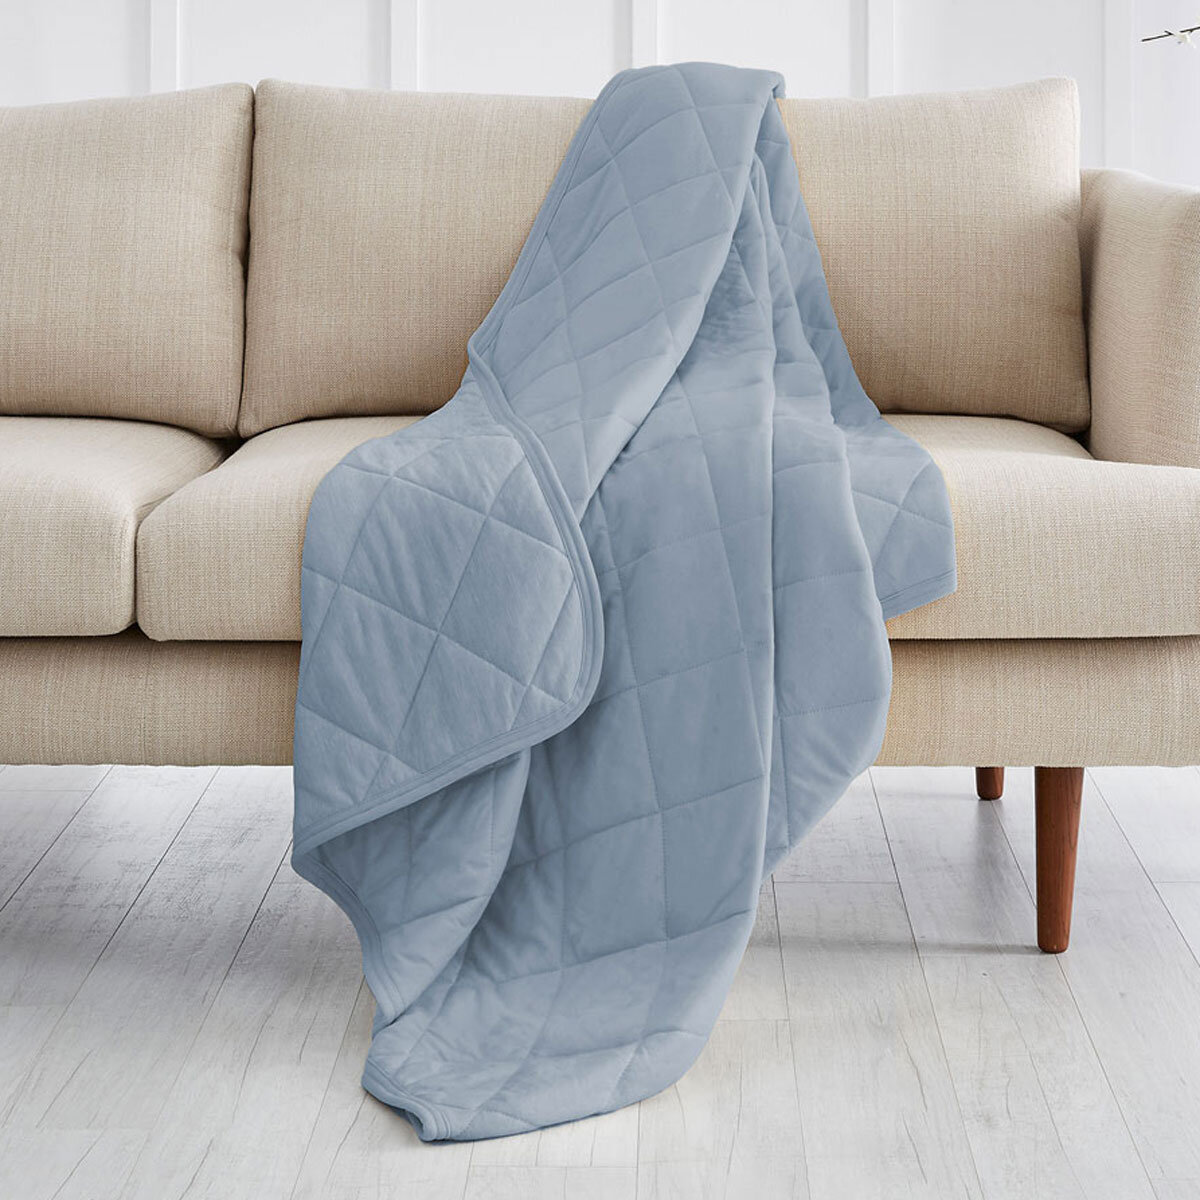 Sutton Place Cooling Throw in 2 Colours, 152 x 177 cm